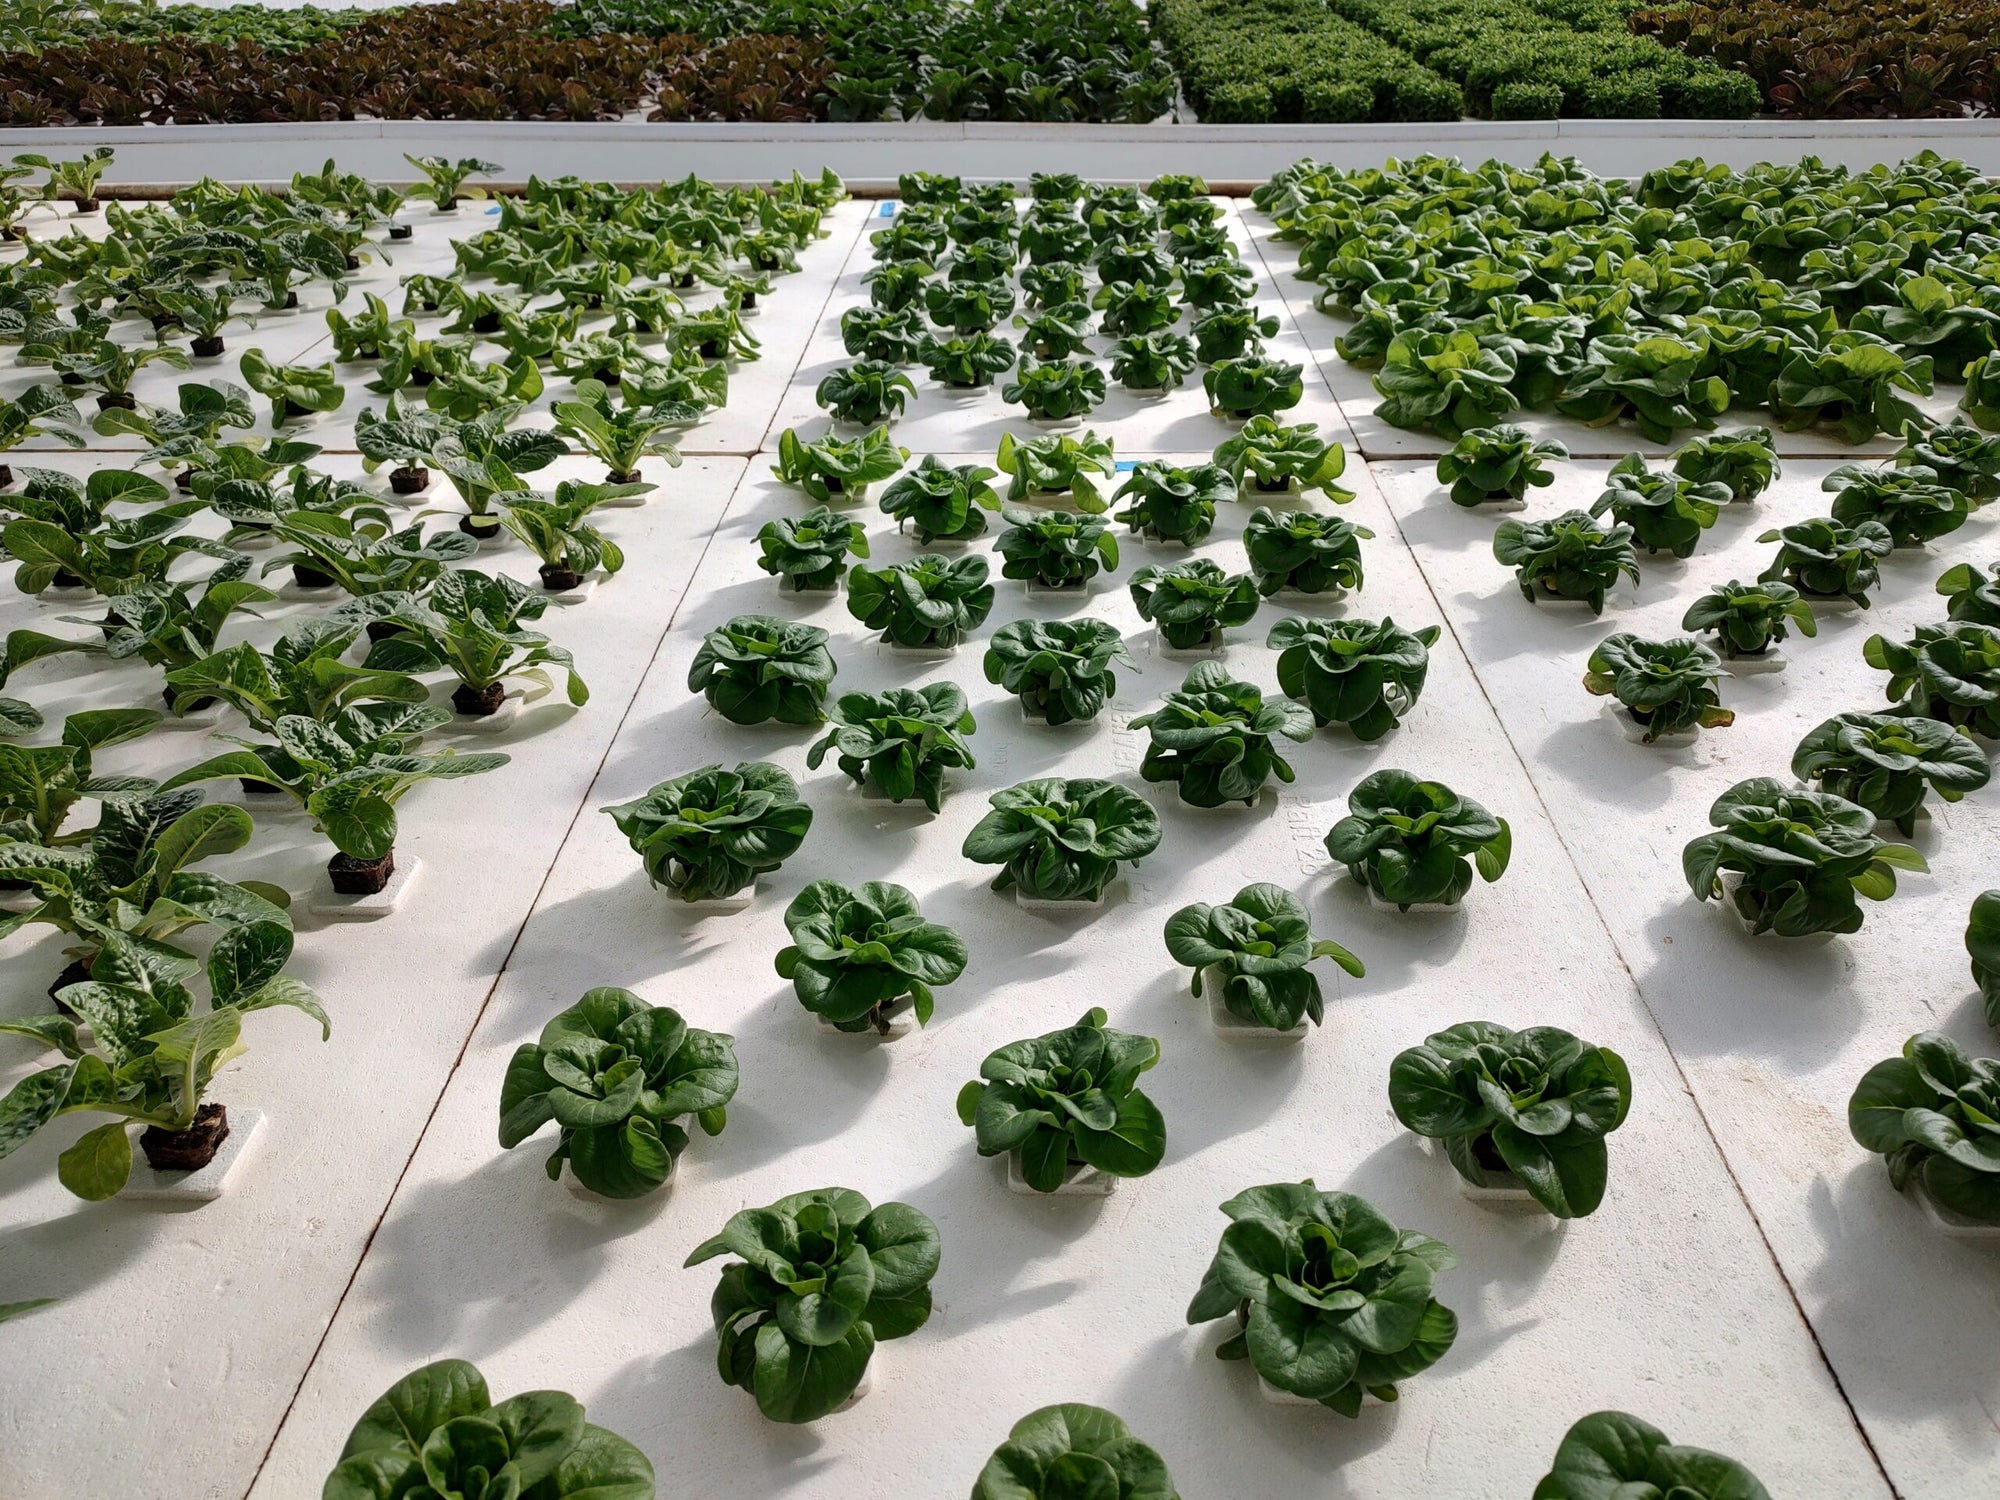 A row of Beaver Plastics' Deep Water Culture Raft Boards lettuce plants in a greenhouse.